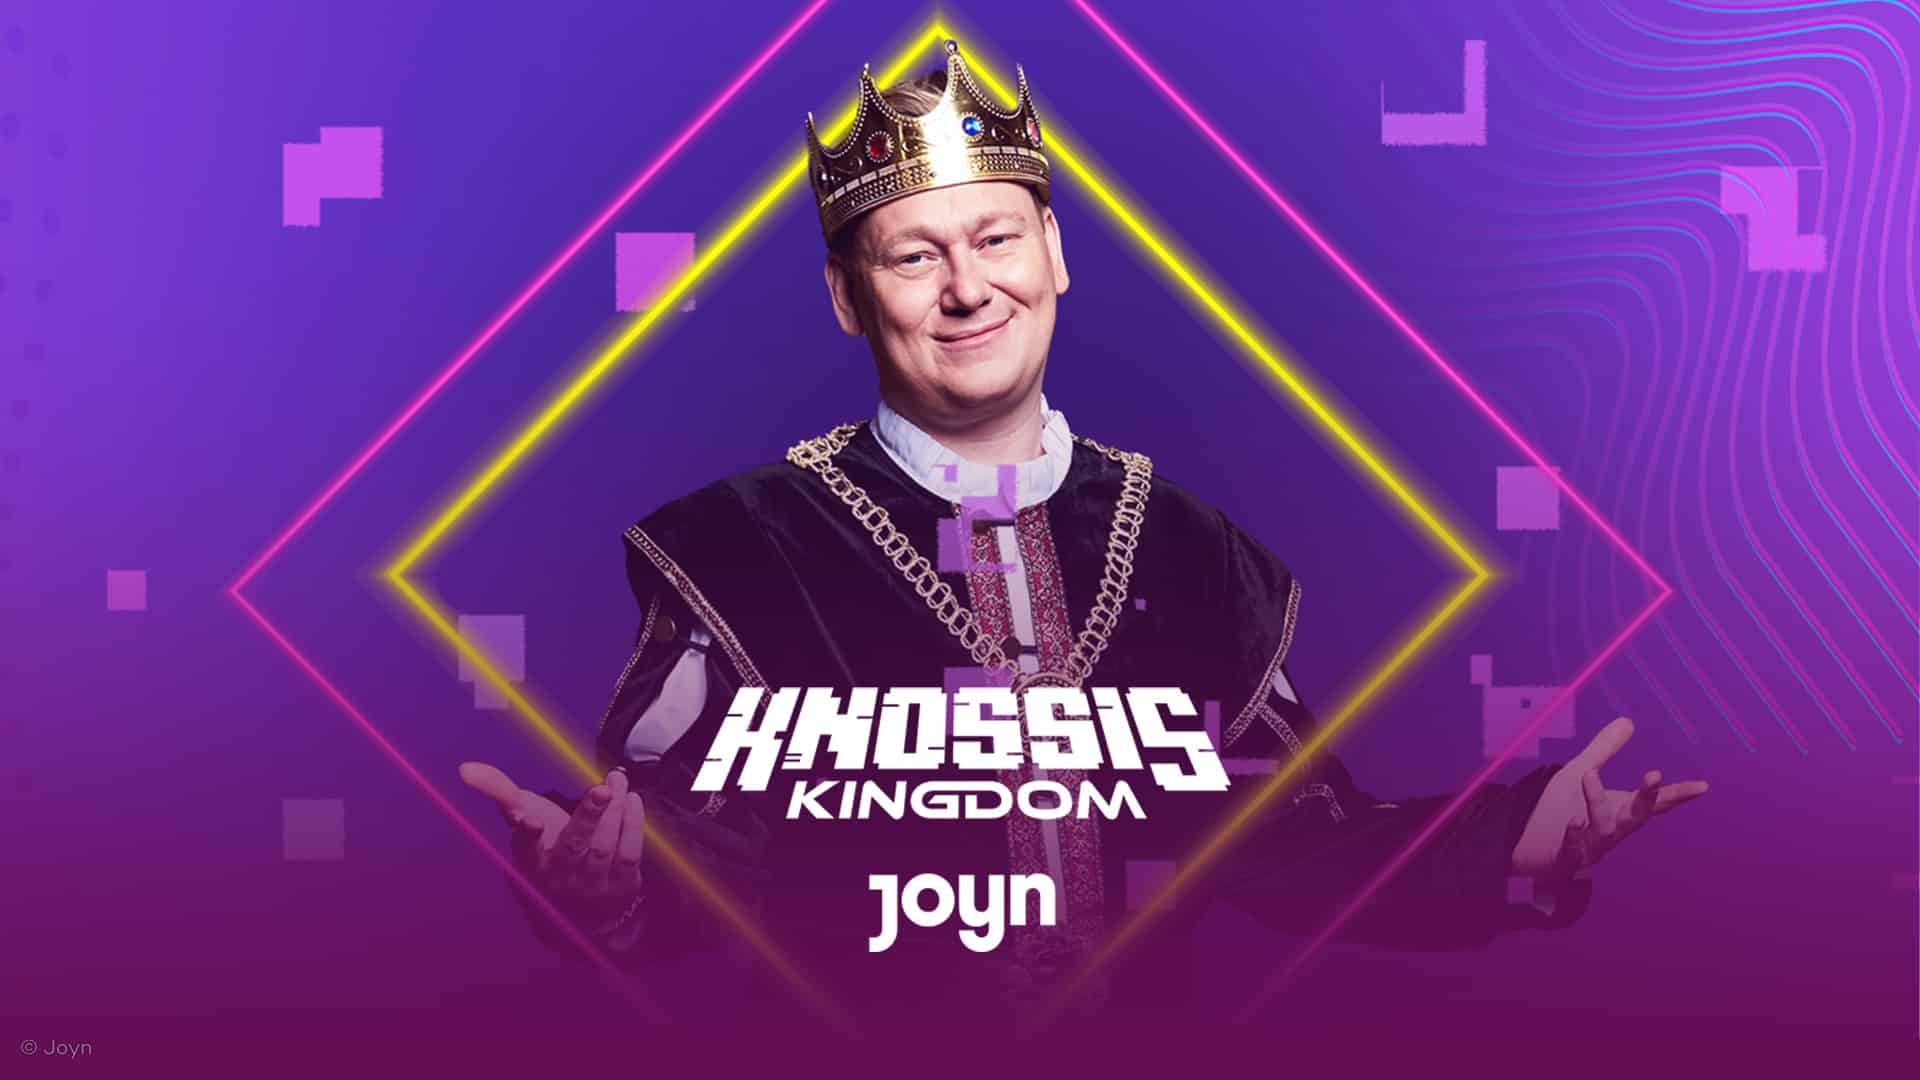 Watch Knossis Kingdom exclusively and for free on Joyn starting today